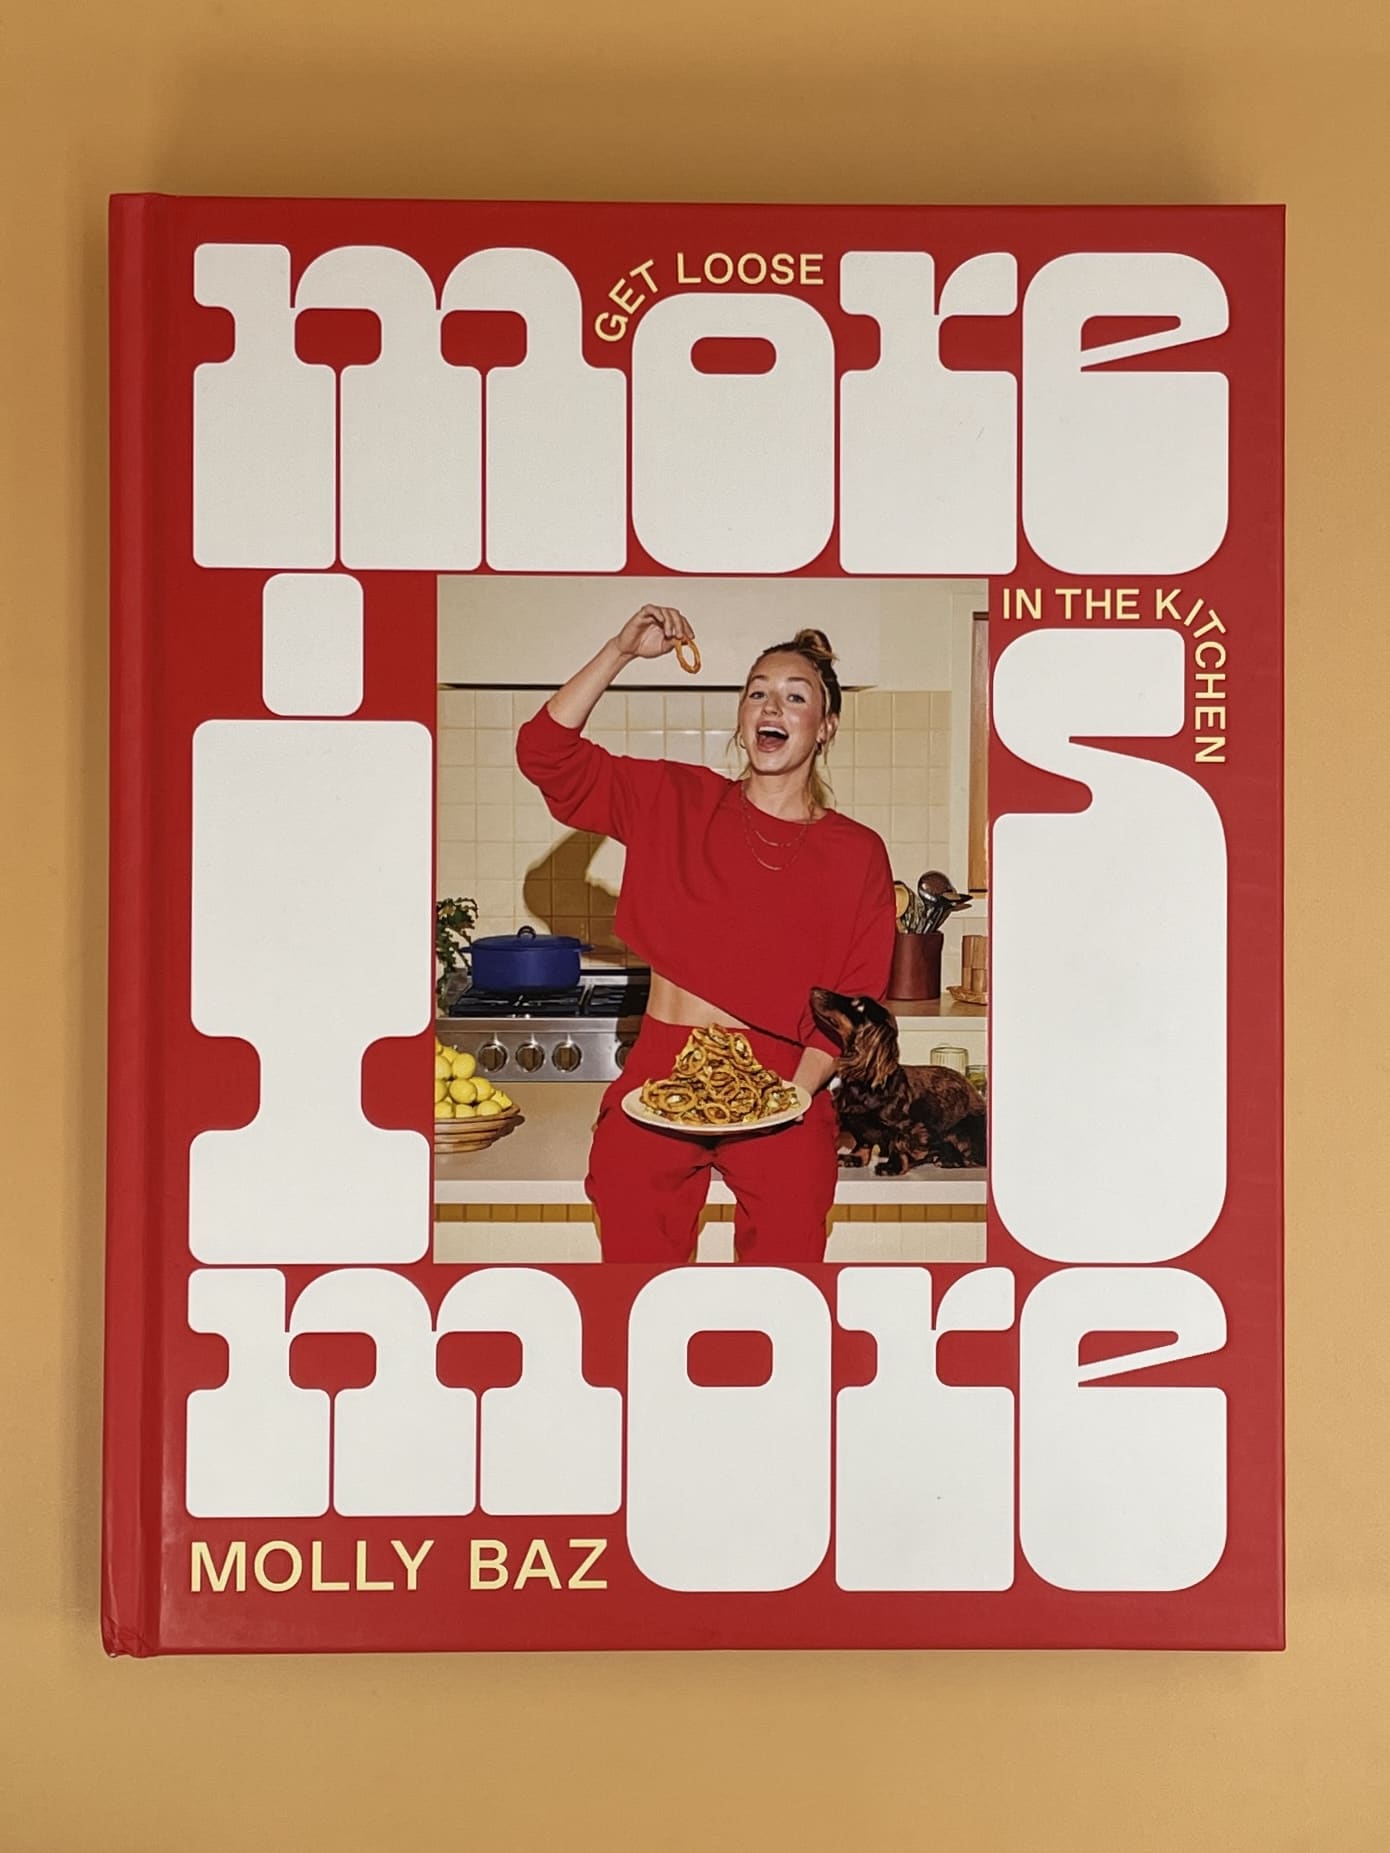 More Is More: Get Loose in the Kitchen (Molly Baz)